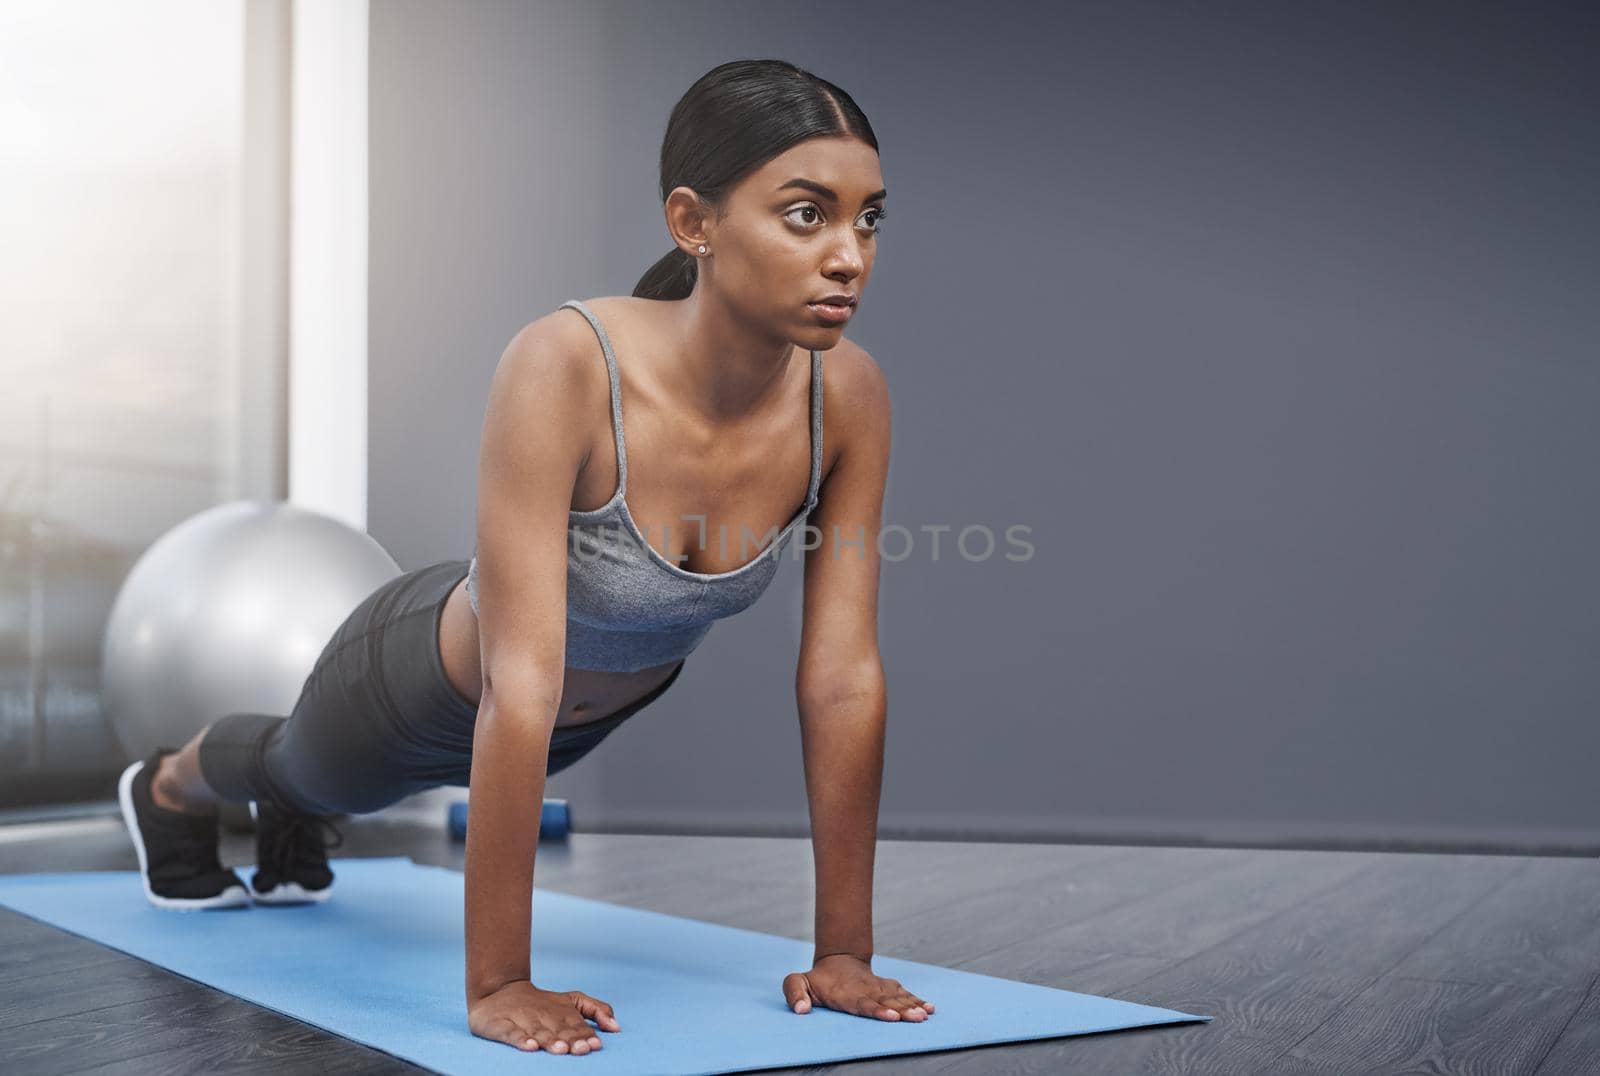 Every decision in the end involves balance and sacrifice. an attractive young woman busy doing stretching exercises on her gym mat at home